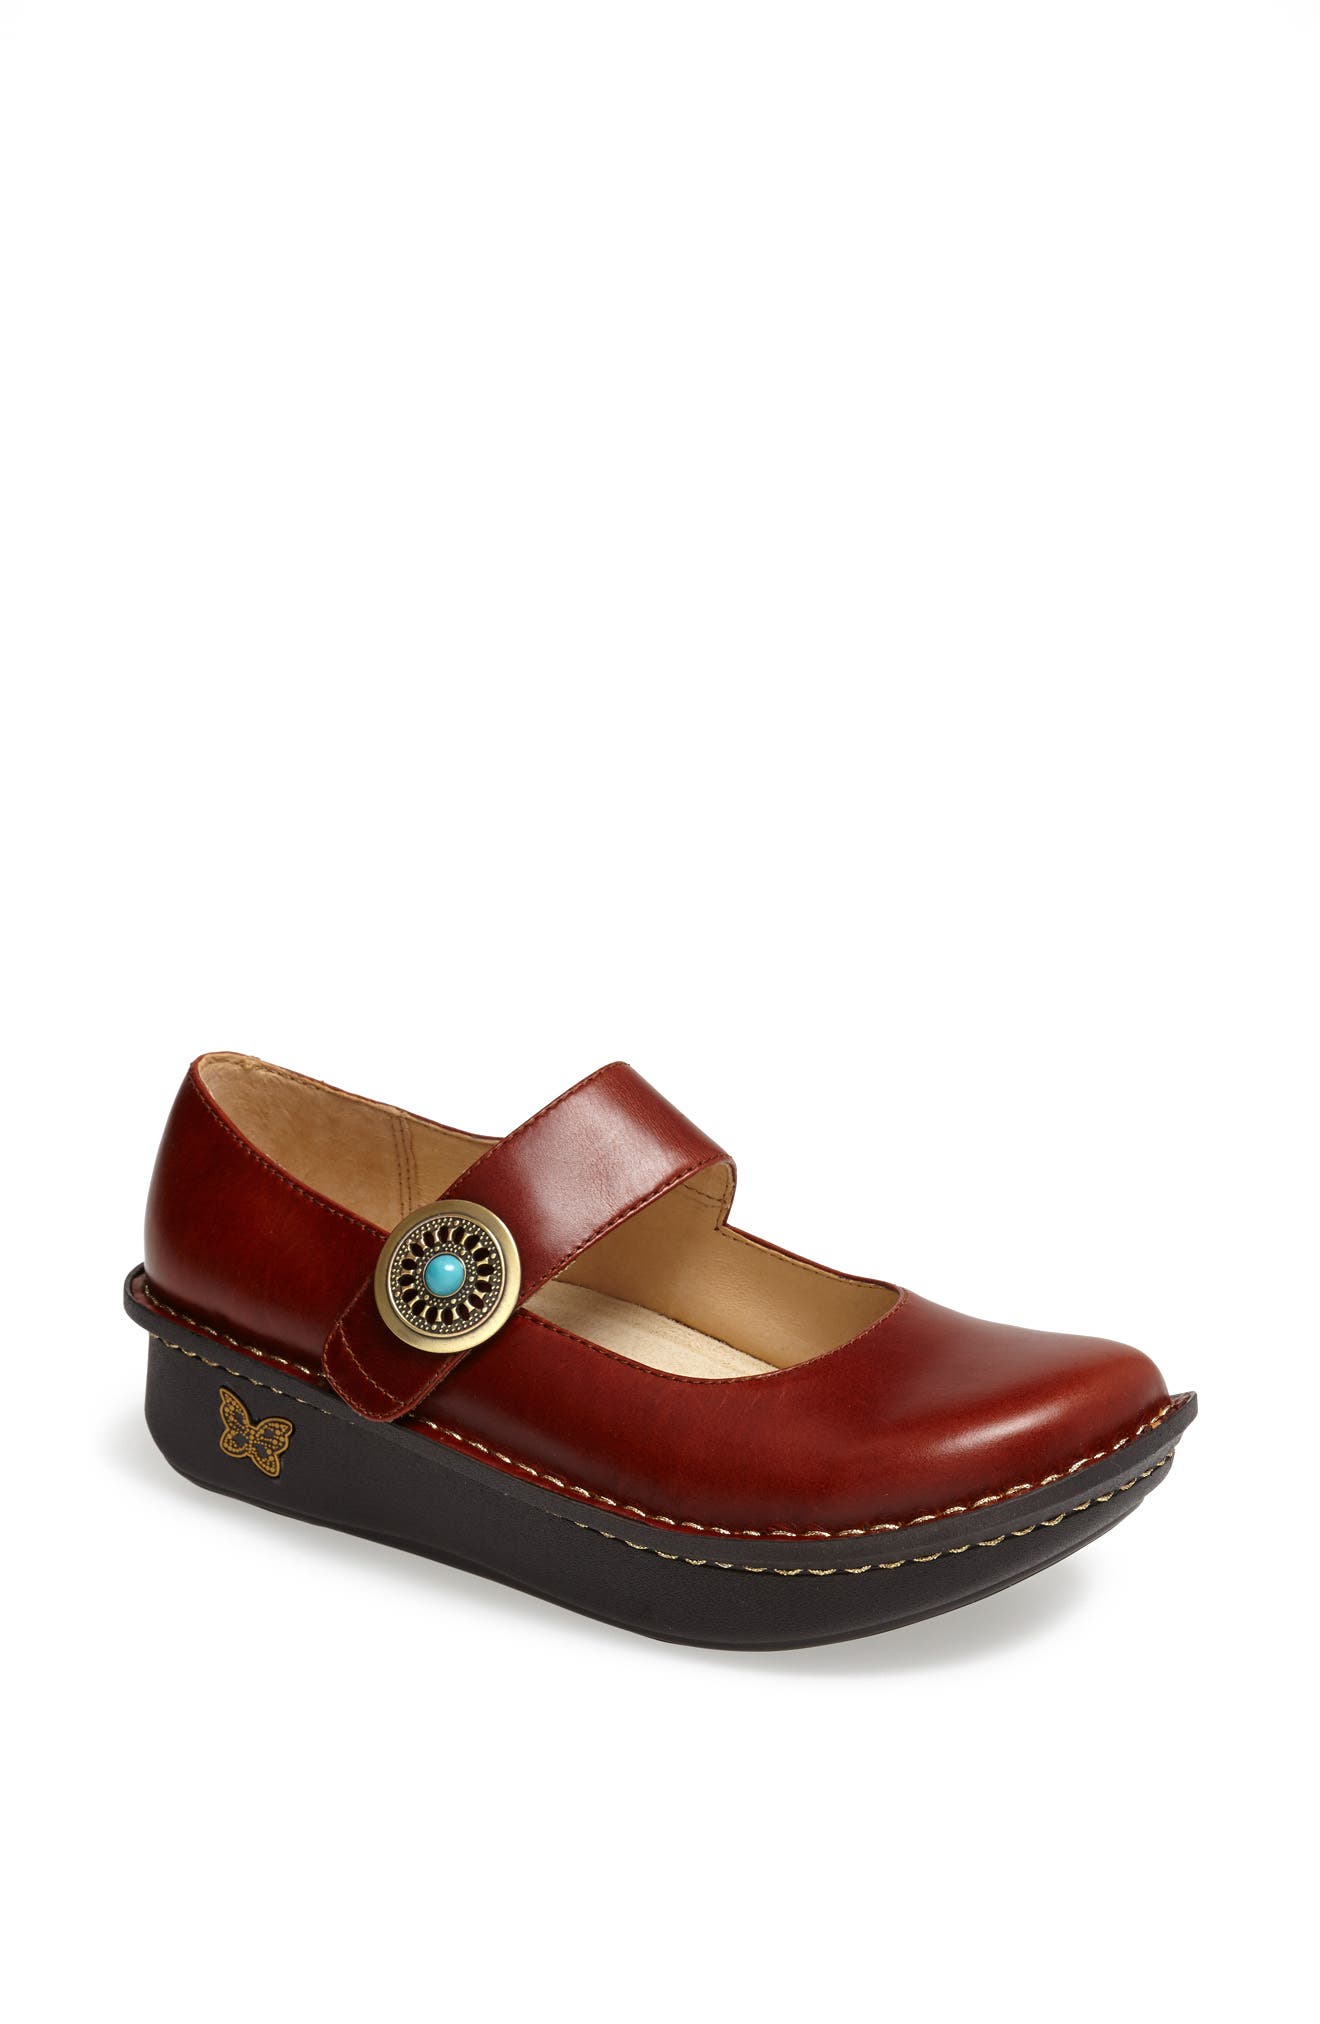 Women's Brown Alegria Shoes | Nordstrom